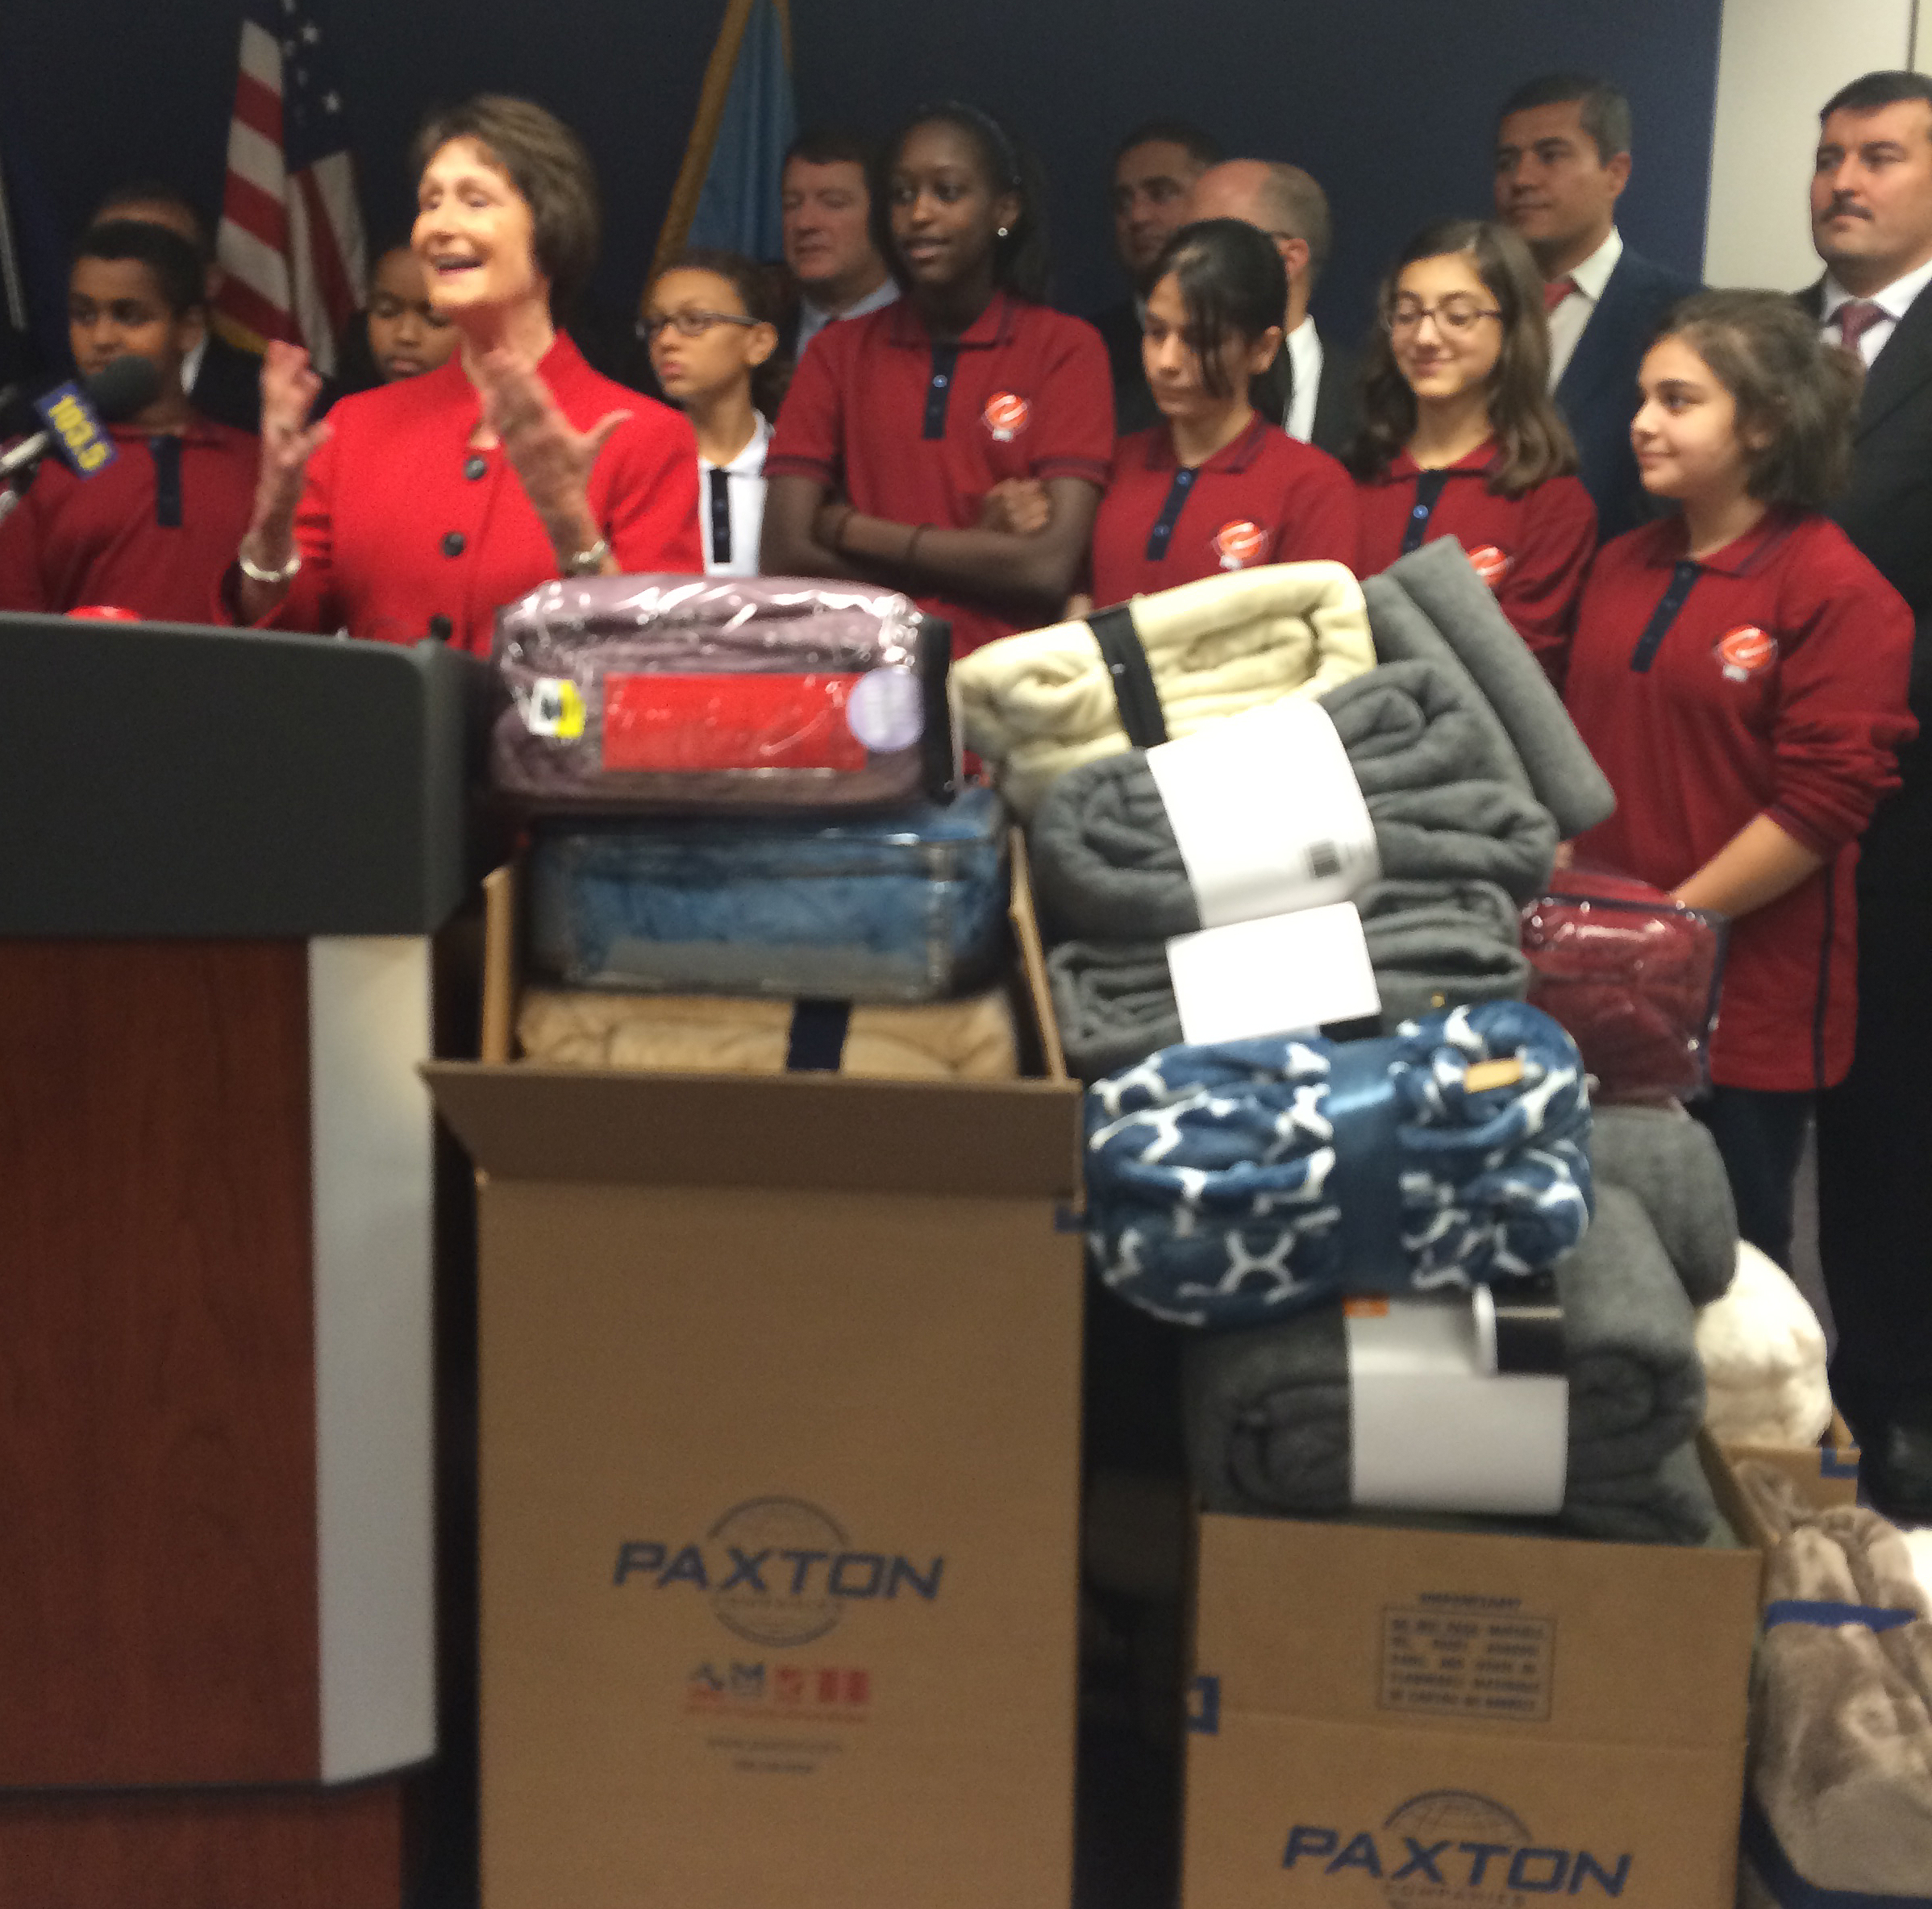 Northern Virginians donate 25,000 blankets to refugees